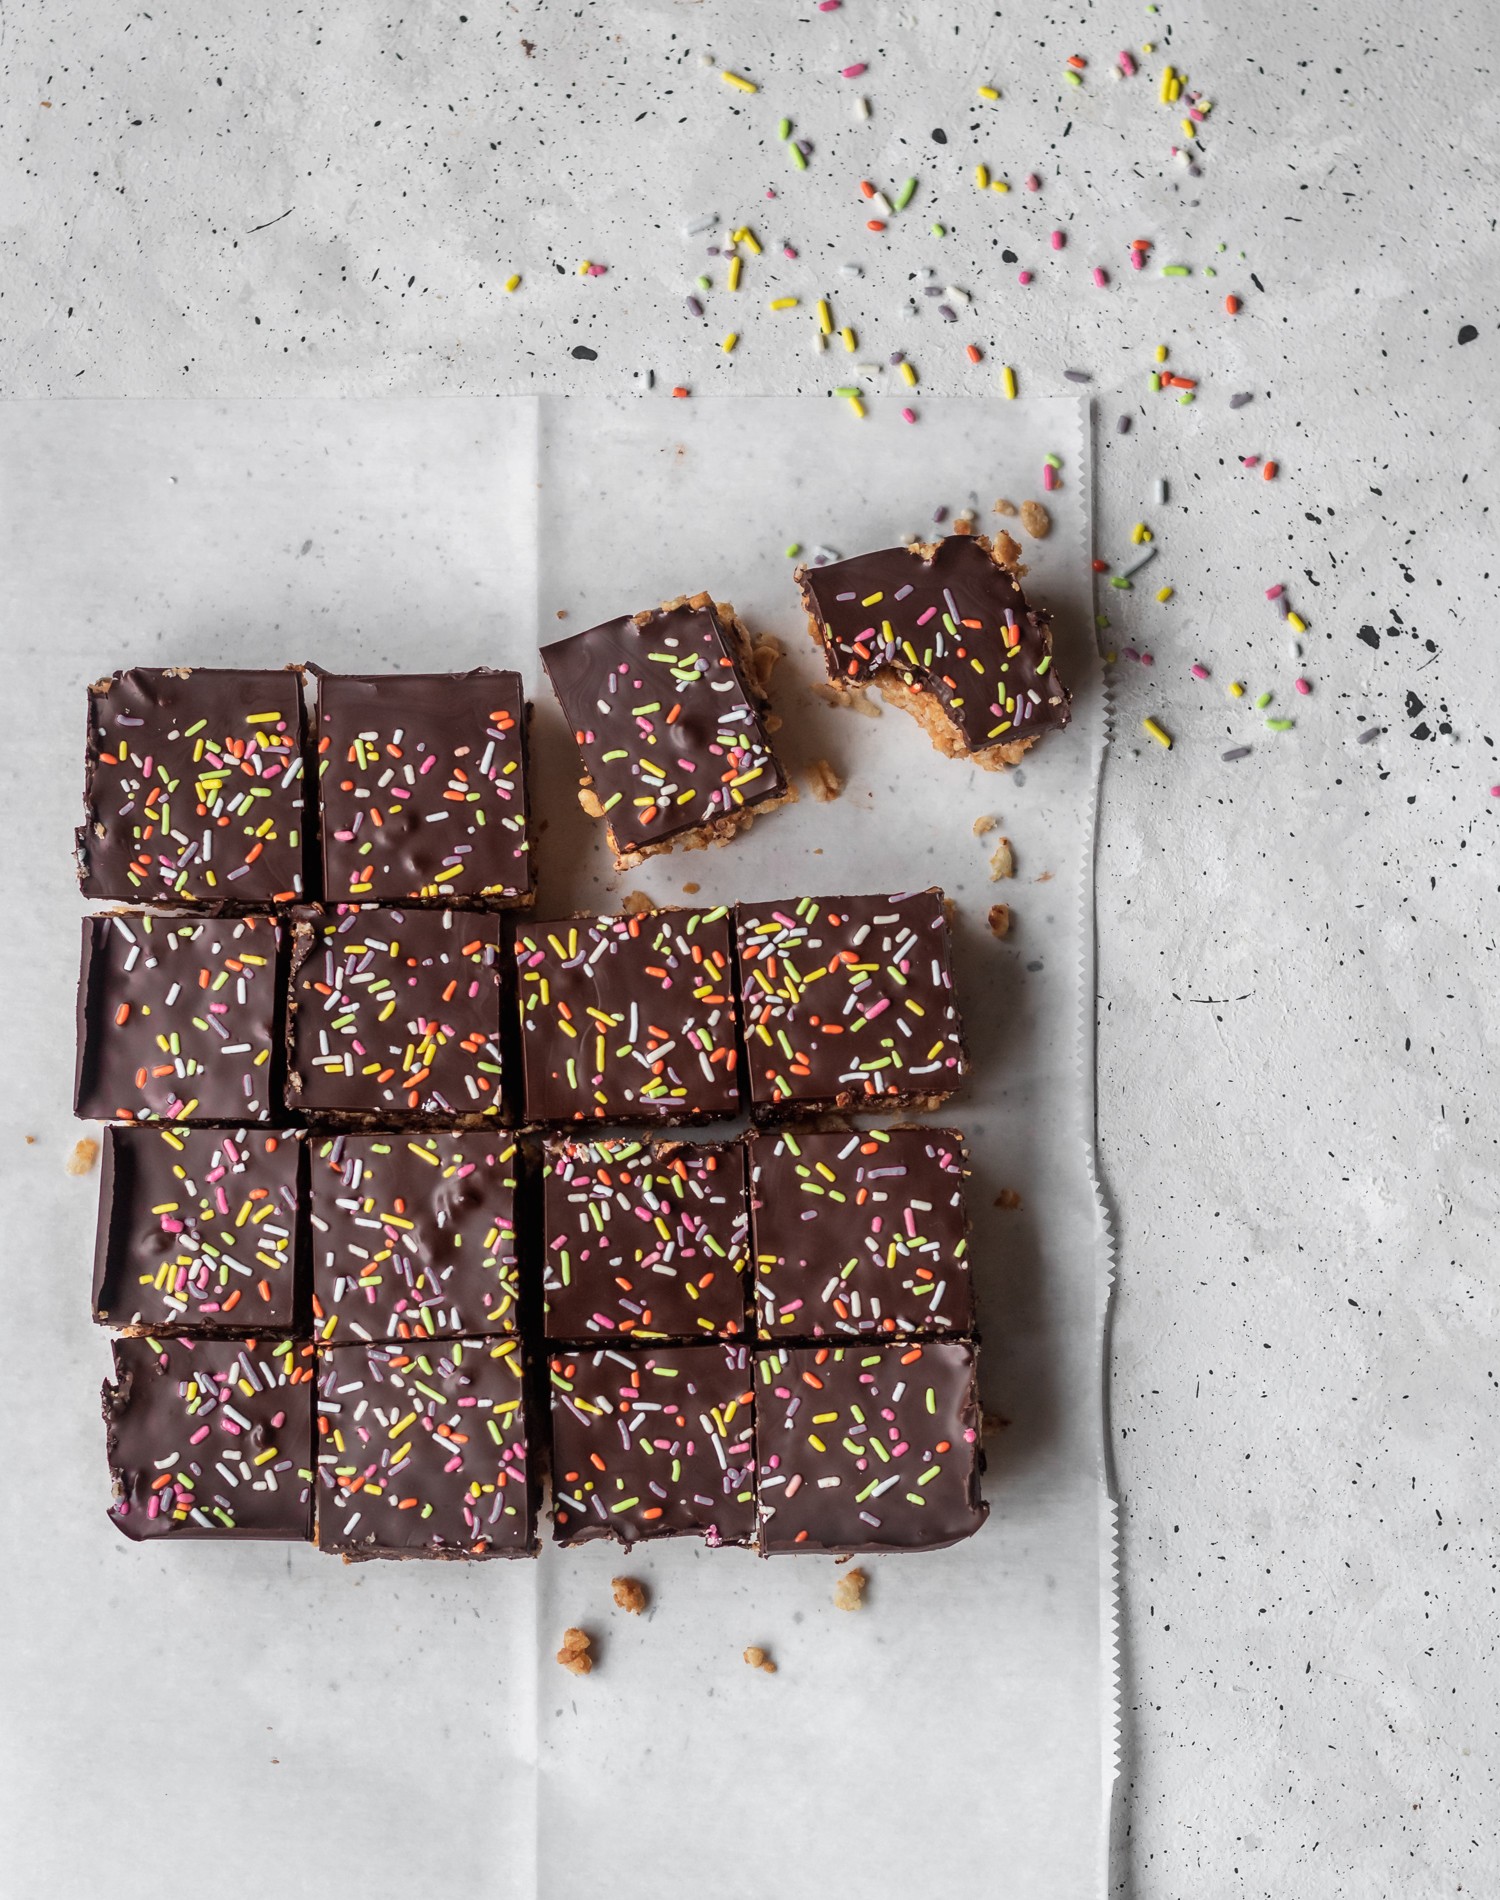 Crispy Chocolate Peanut Butter Bars. No-Bake, vegan, and full of wholesome ingredients!